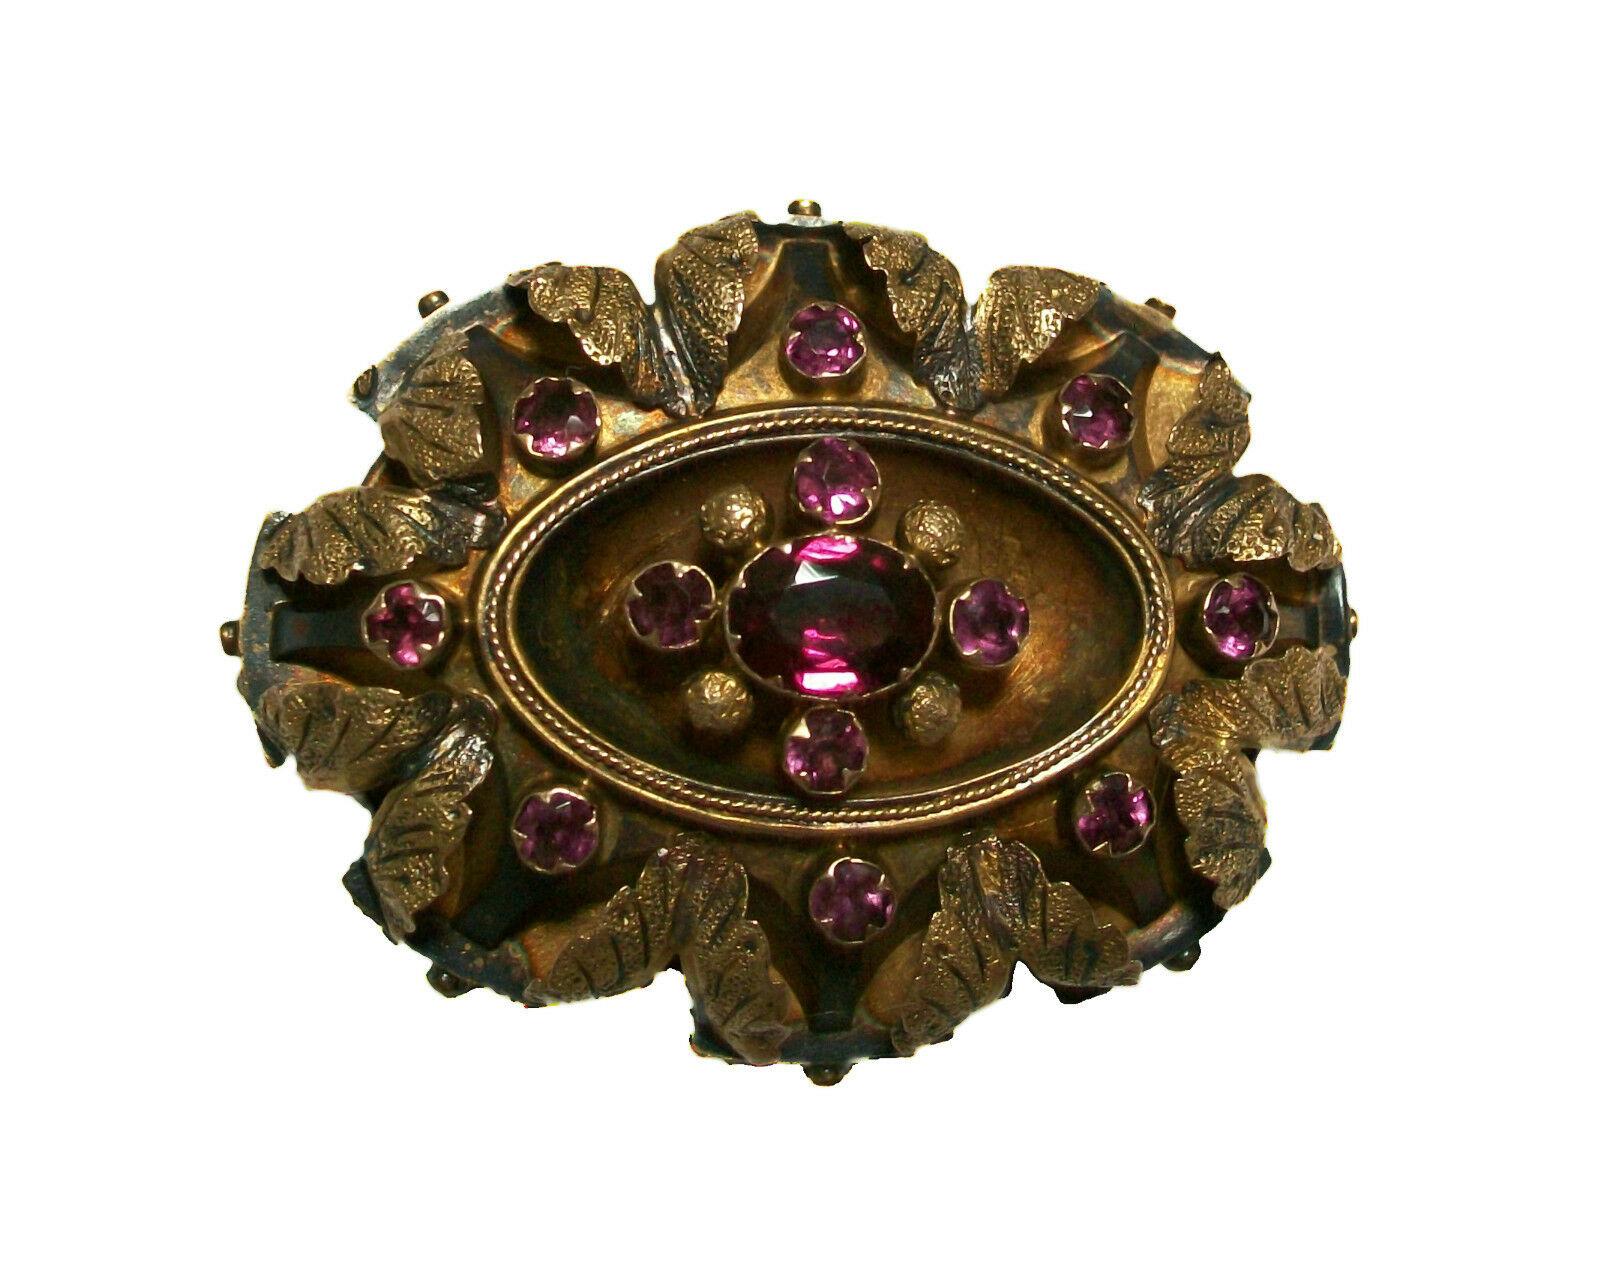 BIRKS (1879-Present) - Antique 14K yellow gold oval brooch - set with one large oval faceted purple Tourmaline (approx. .56 carats - 6.5 x 5 x 3 mm.) - surrounded by 12 small round faceted purple Tourmaline (well matched - 2 mm. diameter - approx.